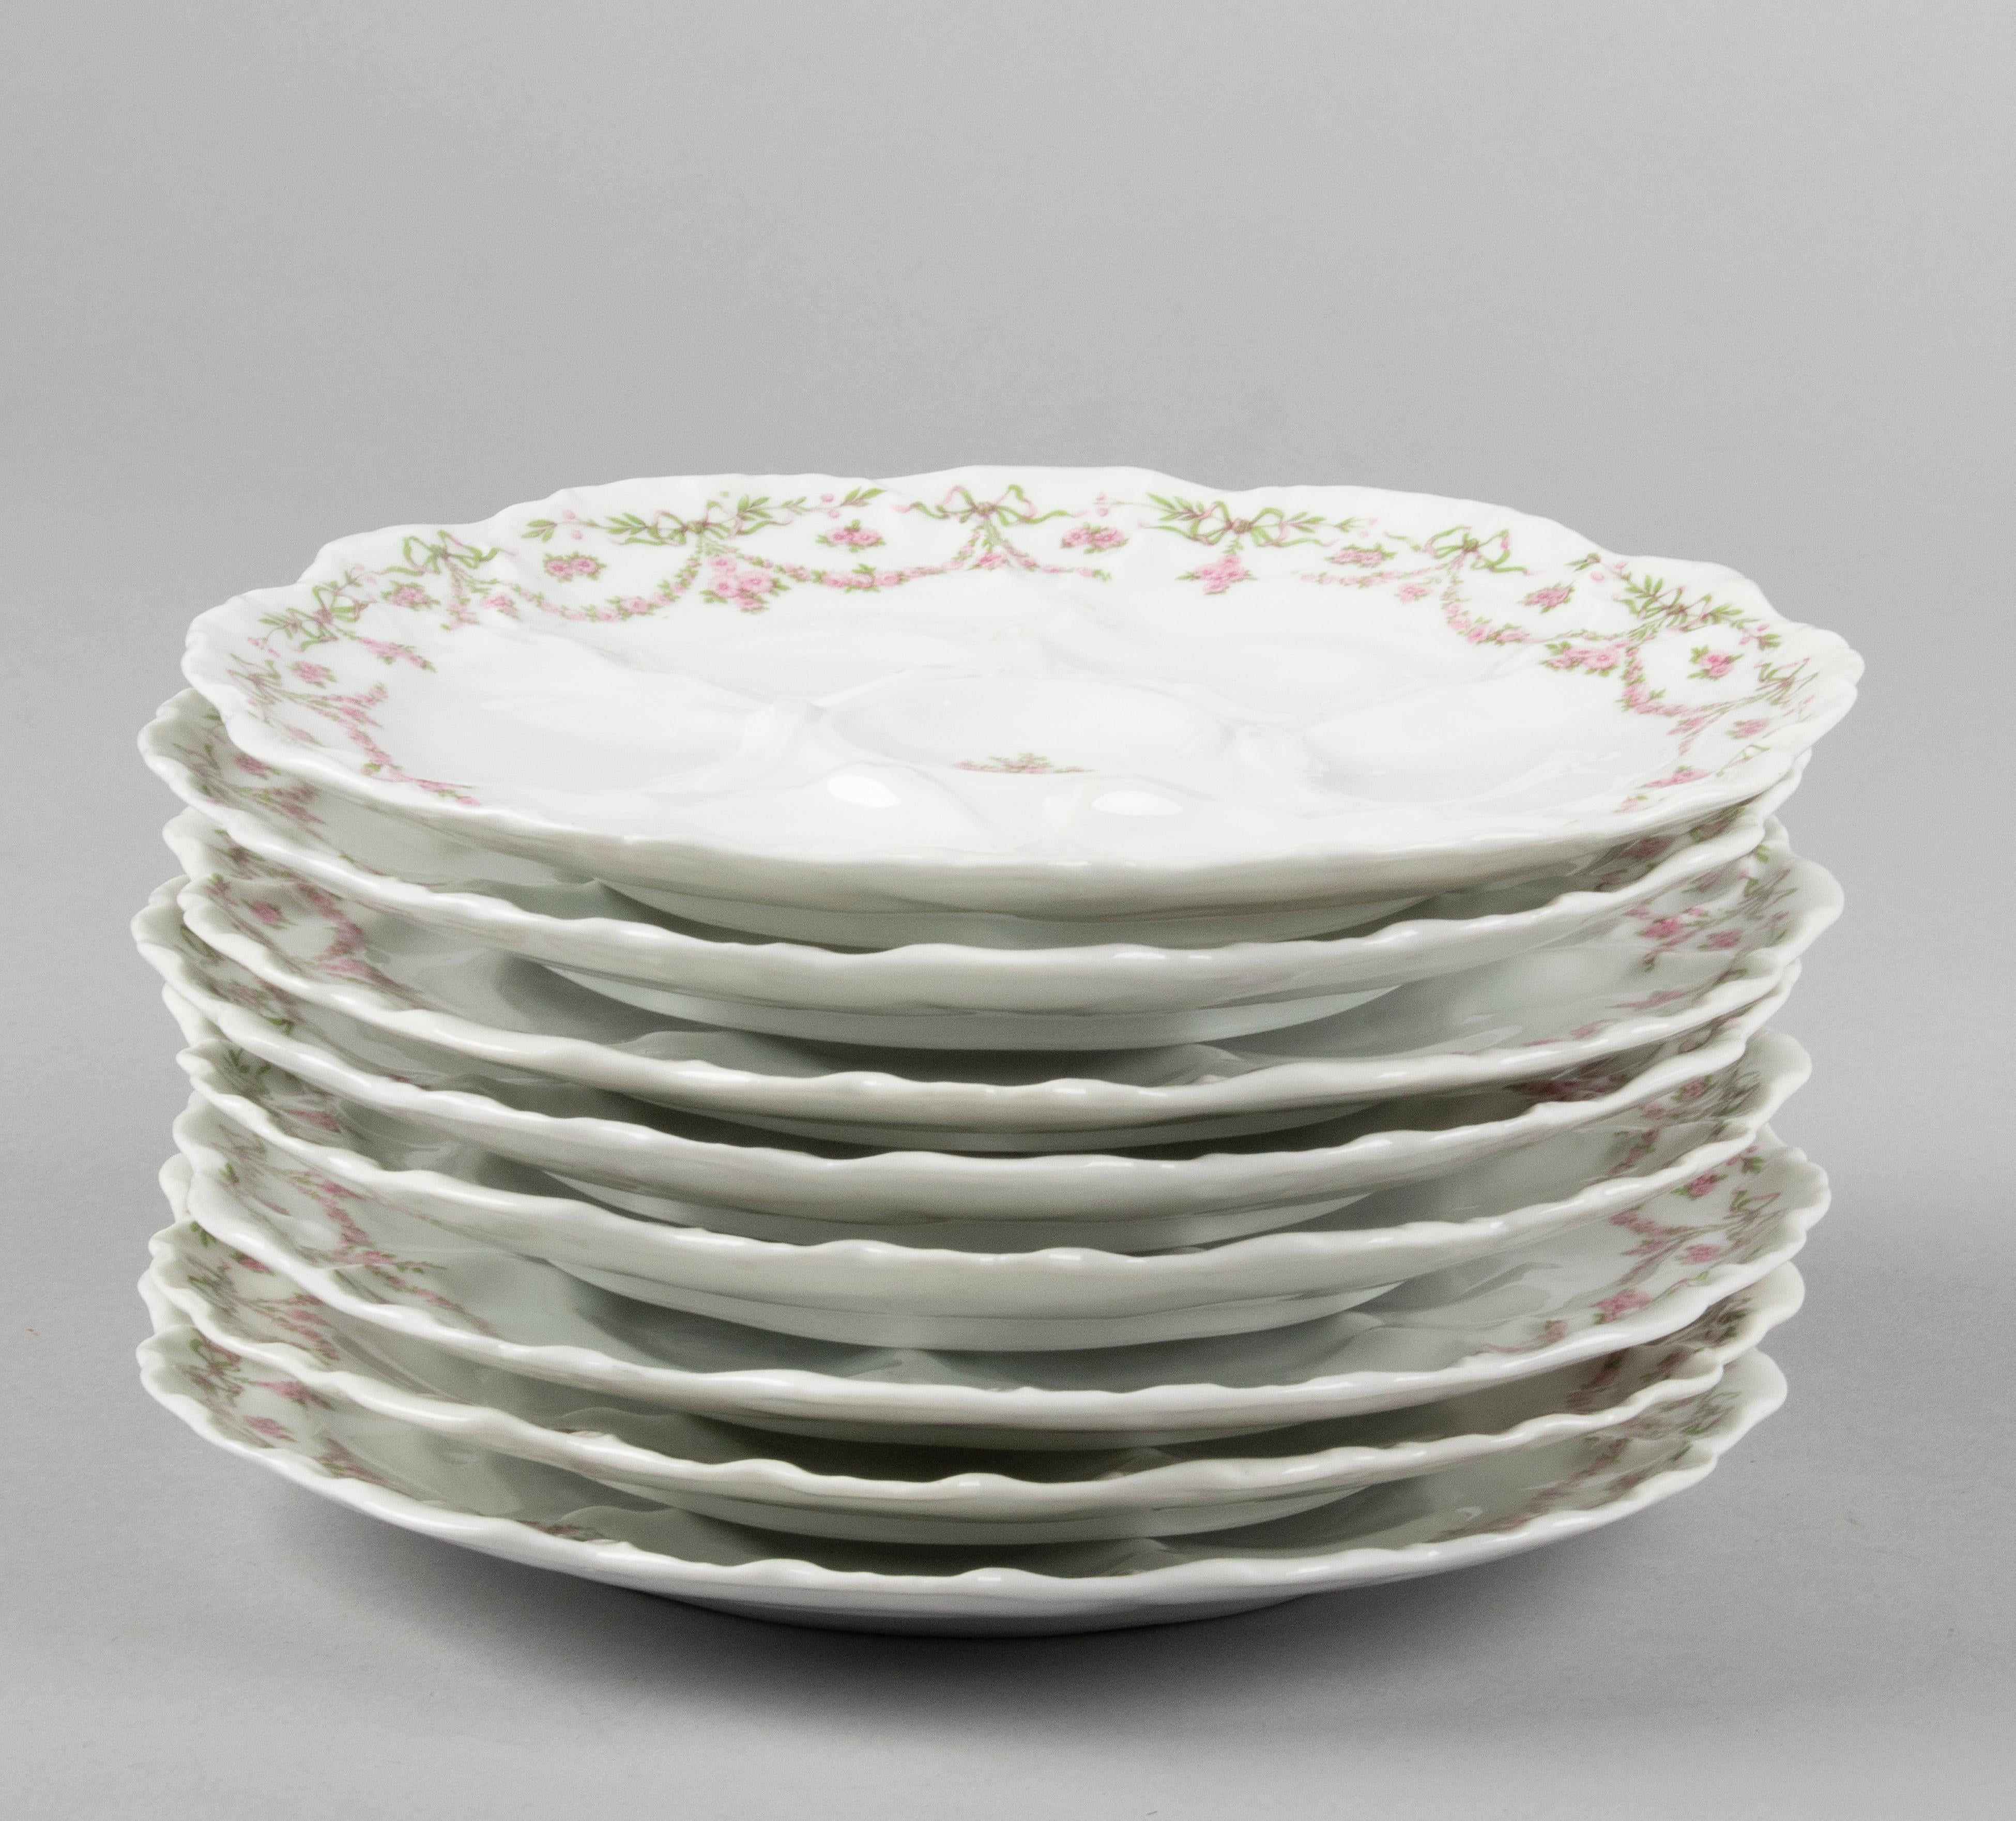 Hand-Crafted Set of 8 Porcelain Oyster Plates by Limoges